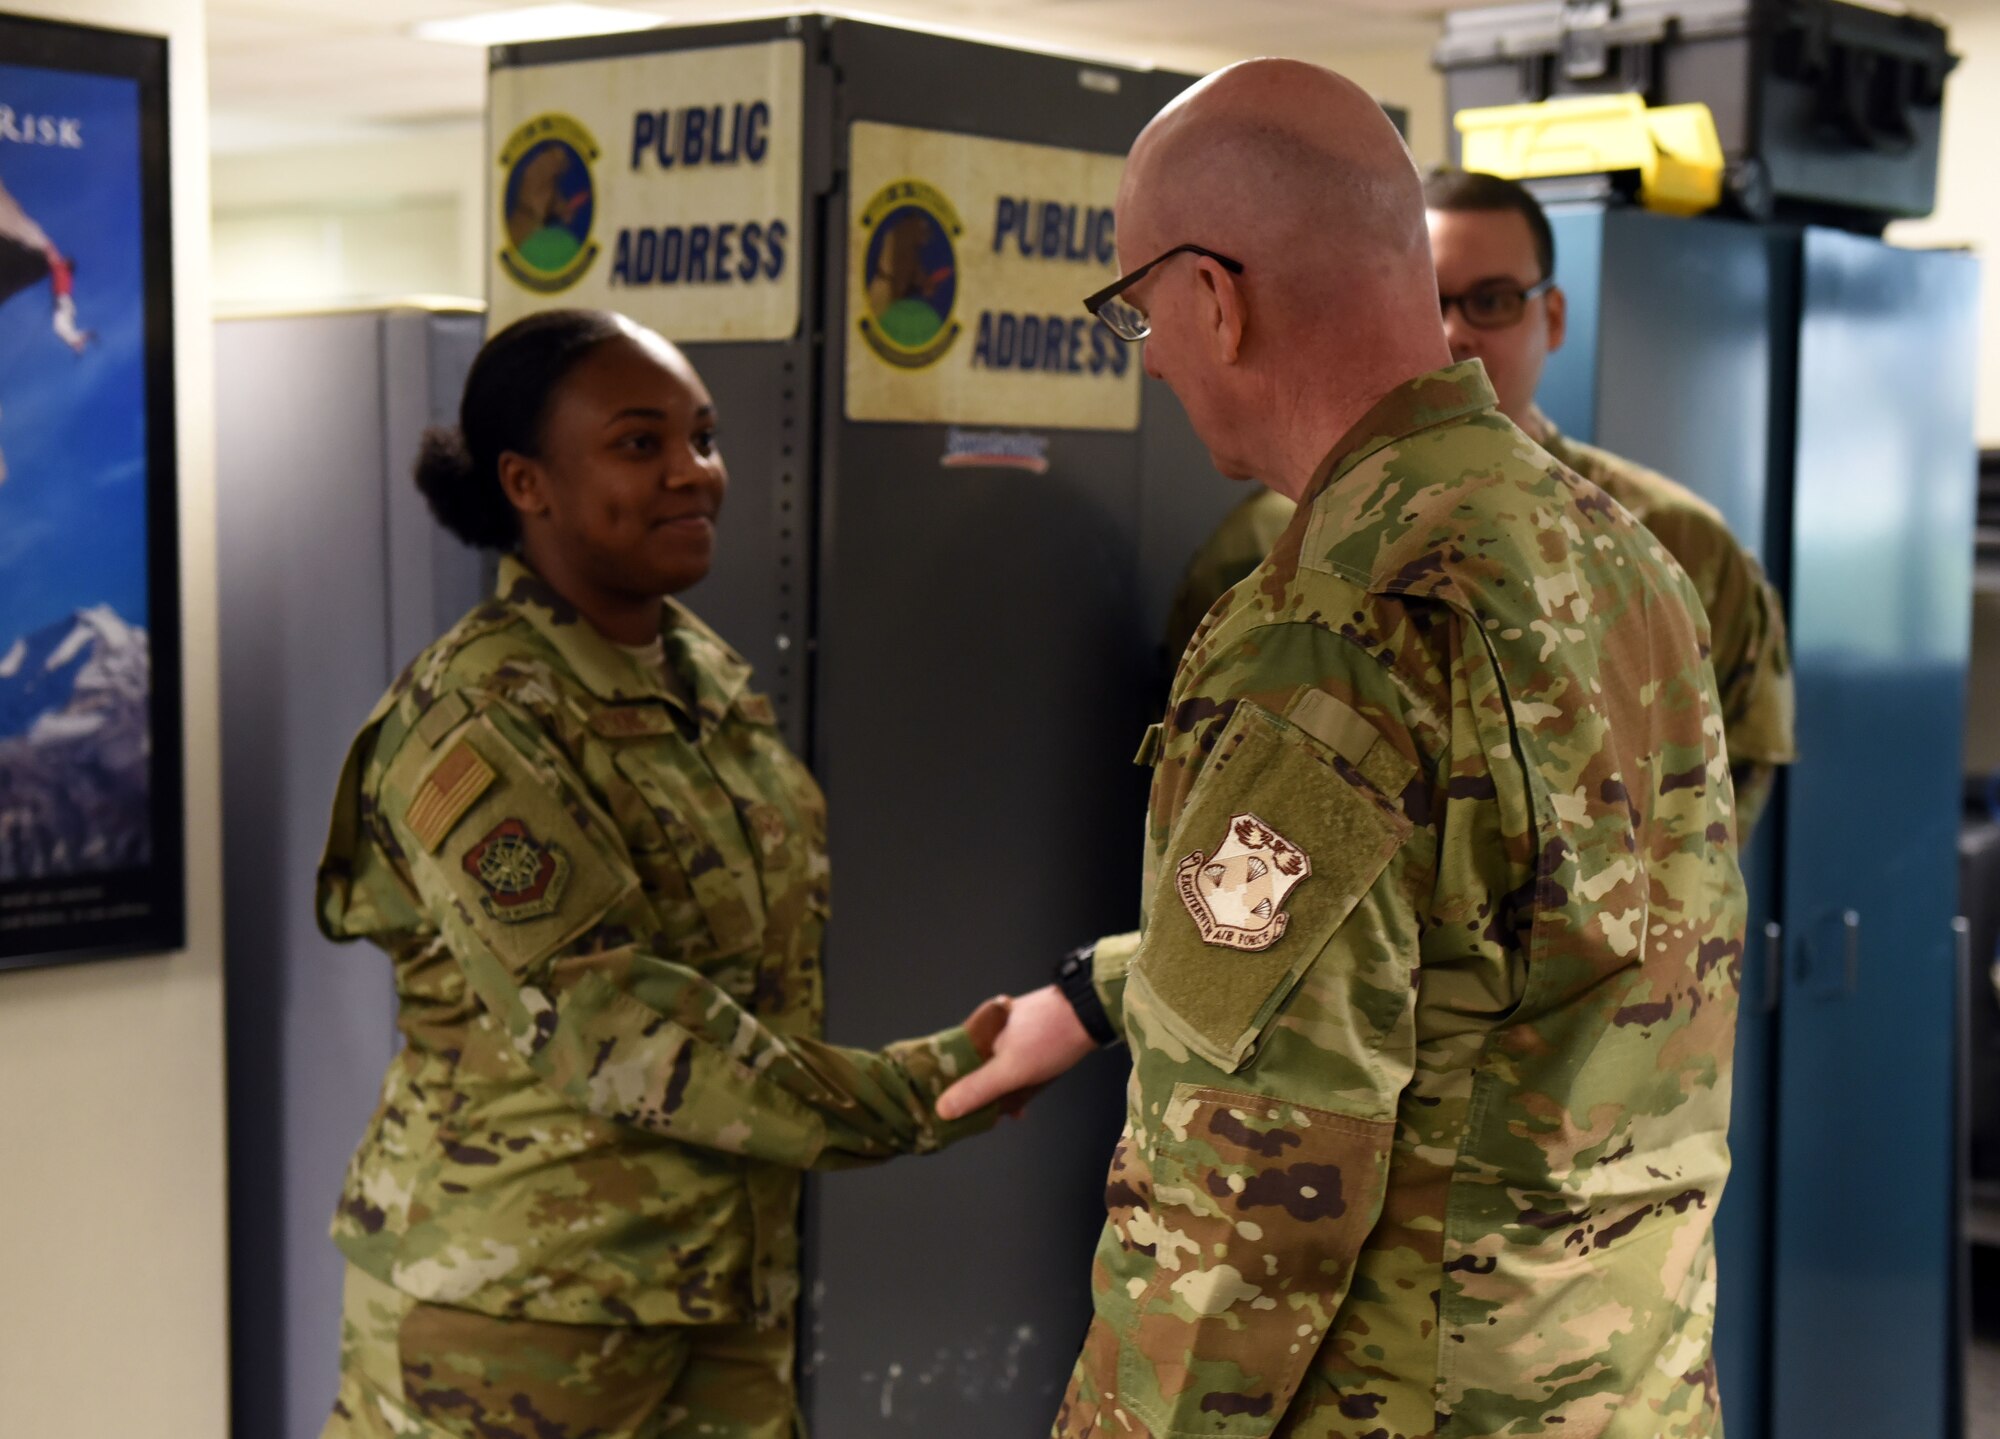 U.S. Air Force Maj. Gen. Sam Barrett, 18th Air Force commander, presents a coin to star performer U.S. Air Force Senior Airman Jacqueline Watkins, 60th Communications Squadron client systems technician, during a visit to Travis Air Force Base, California, March 5, 2019. Barrett, along with his wife, Kelly and U.S. Air Force Chief Master Sgt. Chris Simpson, 18th Air Force command chief, toured the base March 4 to 8 as part of a scheduled visit. (U.S. Air Force photo by Airman 1st Class Christian Conrad)